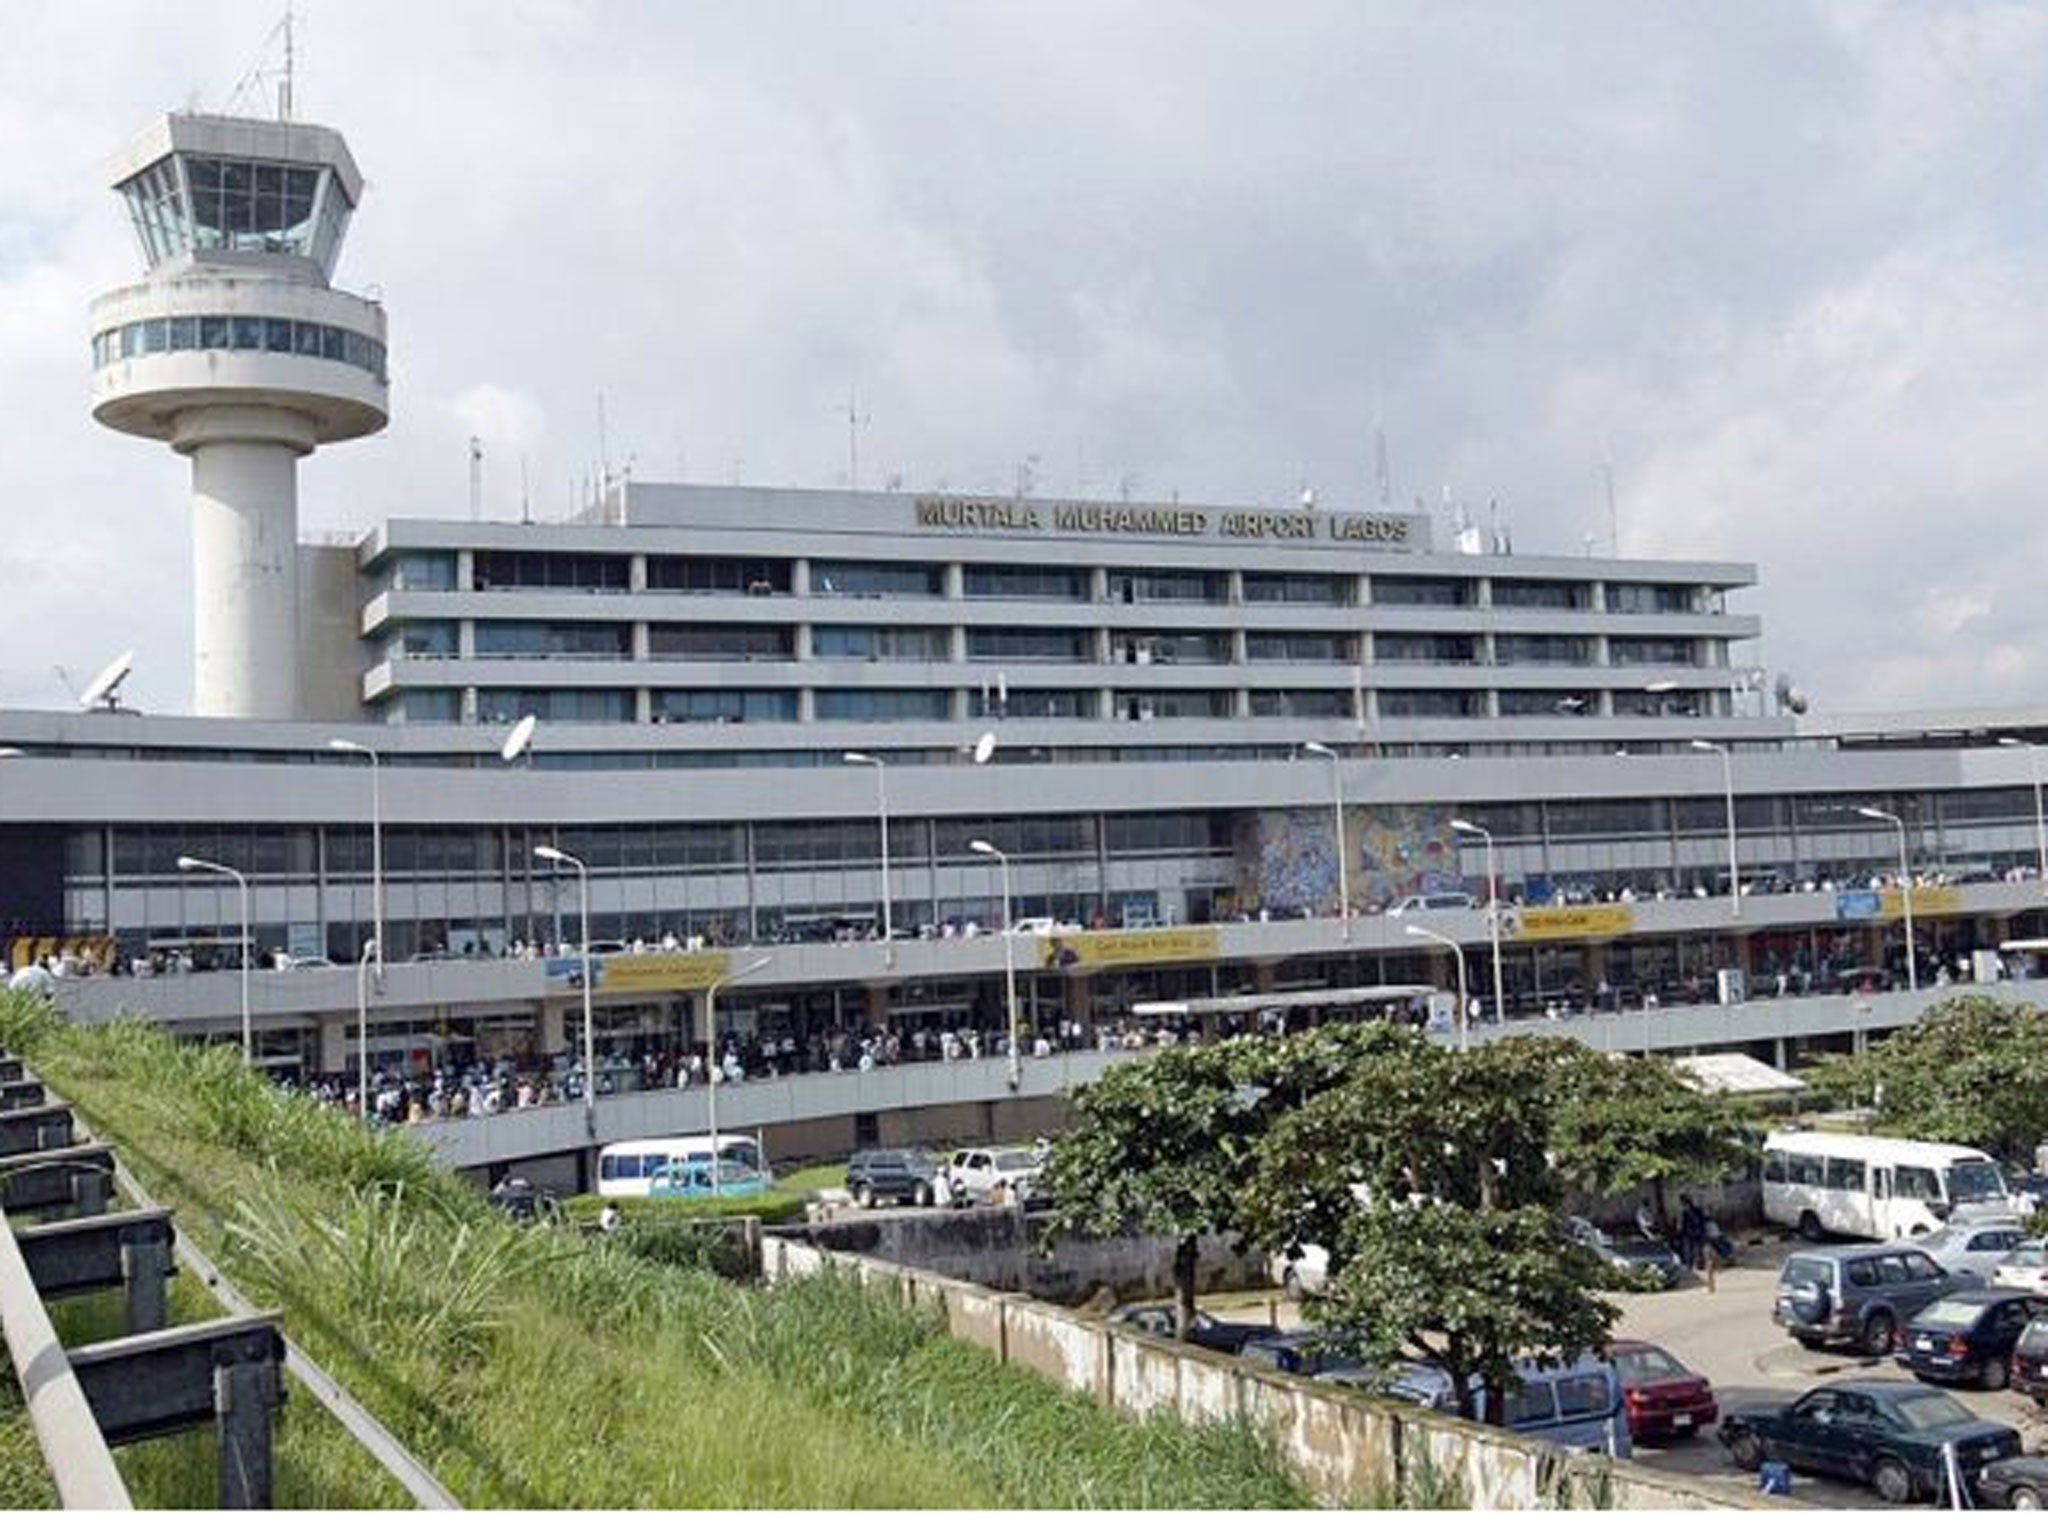 A British national was kidnapped after leaving a terminal at Lagos airport in Nigeria